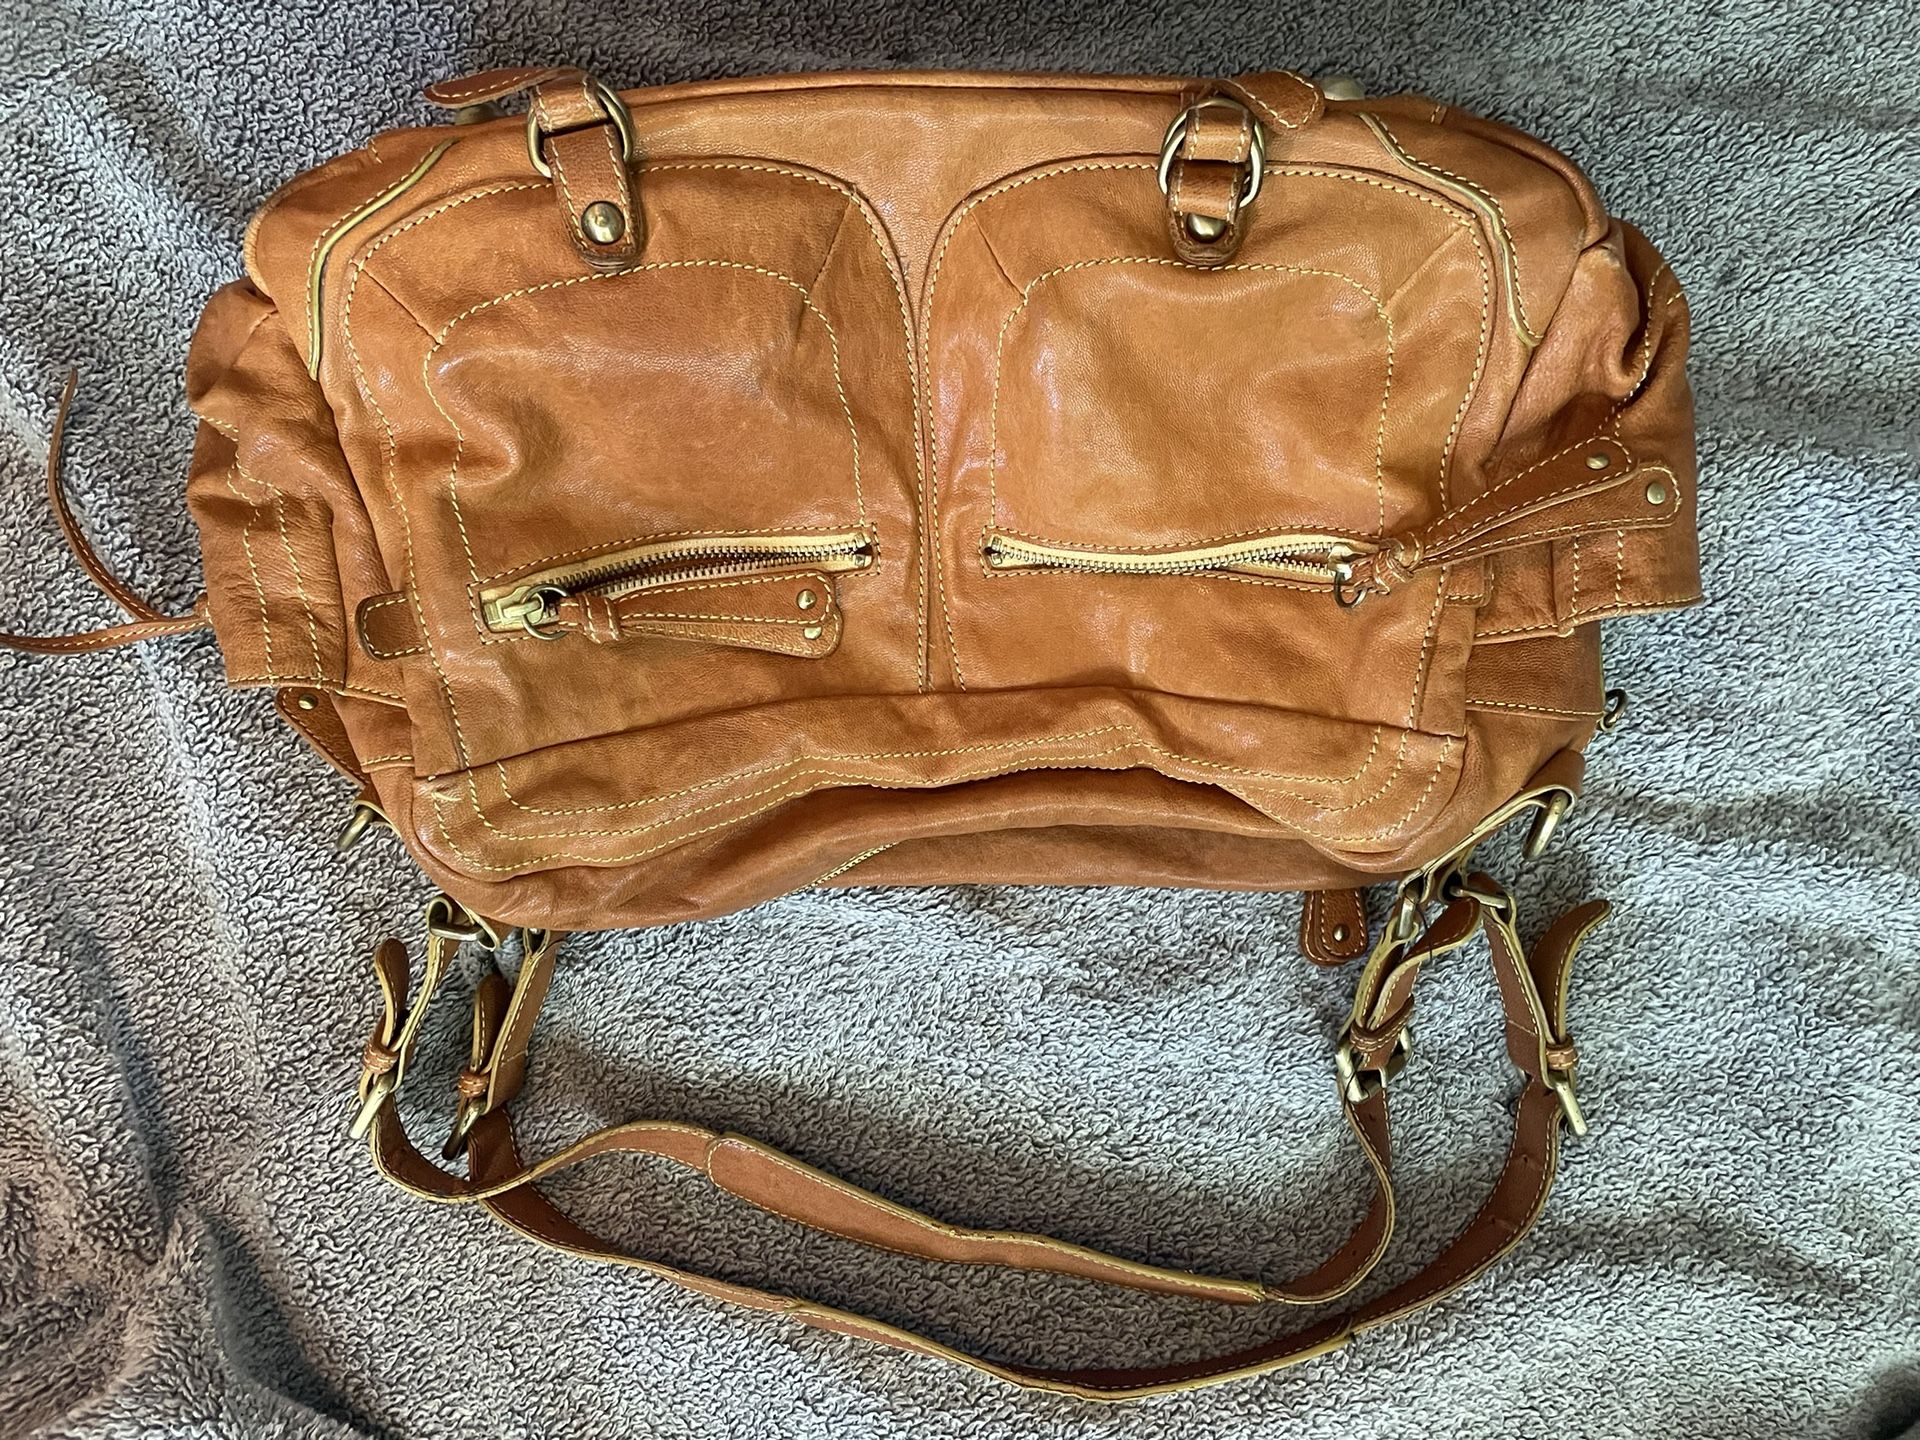 Sorial New York Purse Perfect Condition 